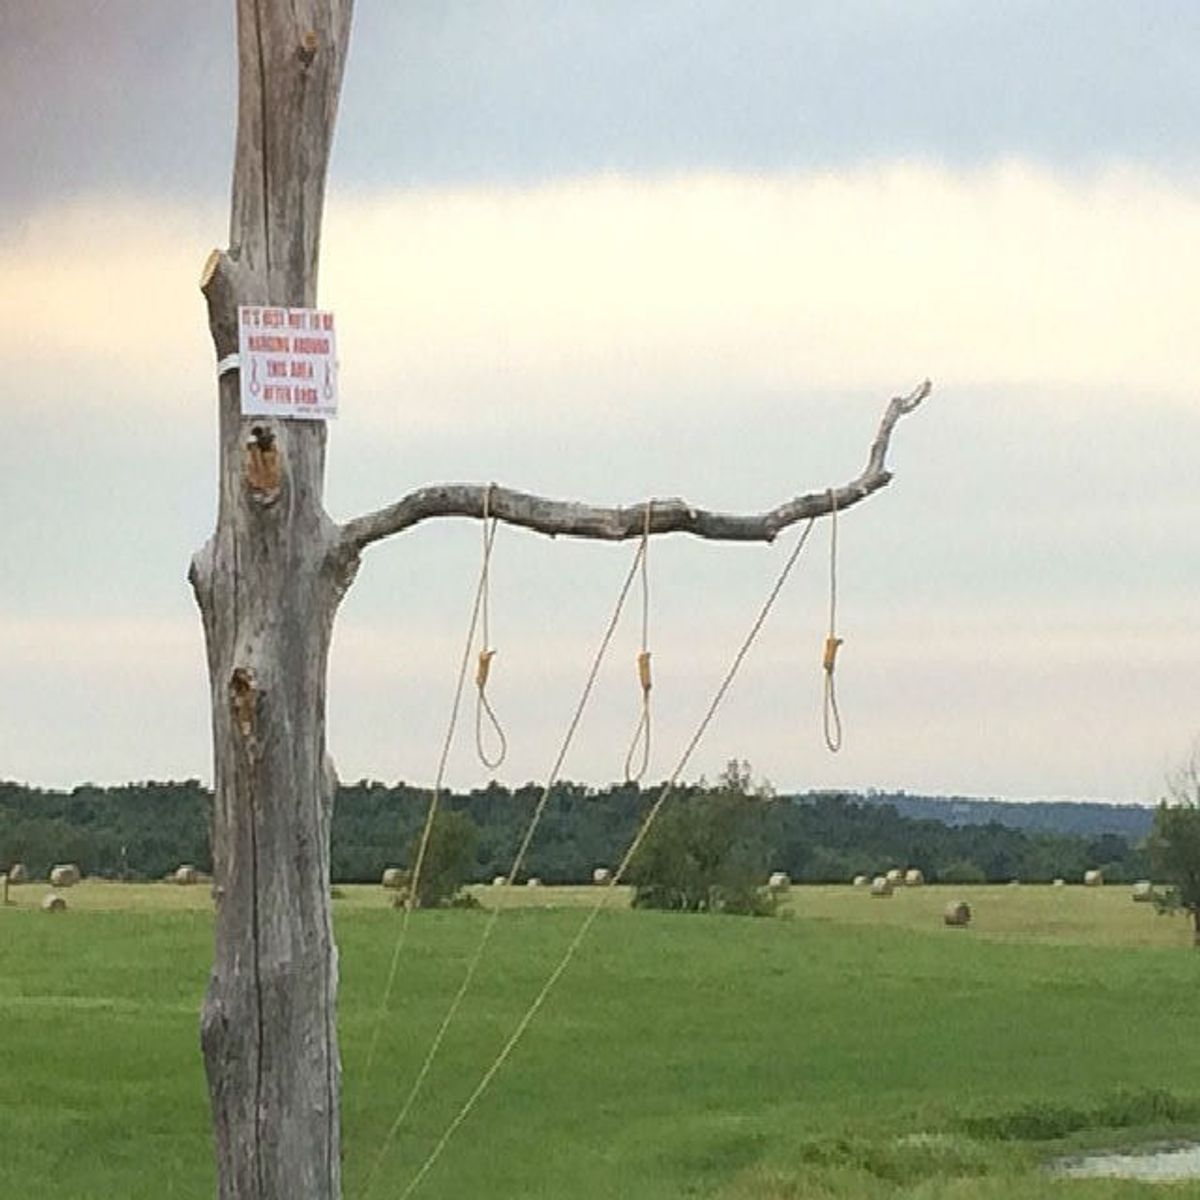 Is Hanging A Noose On A Tree Racist?